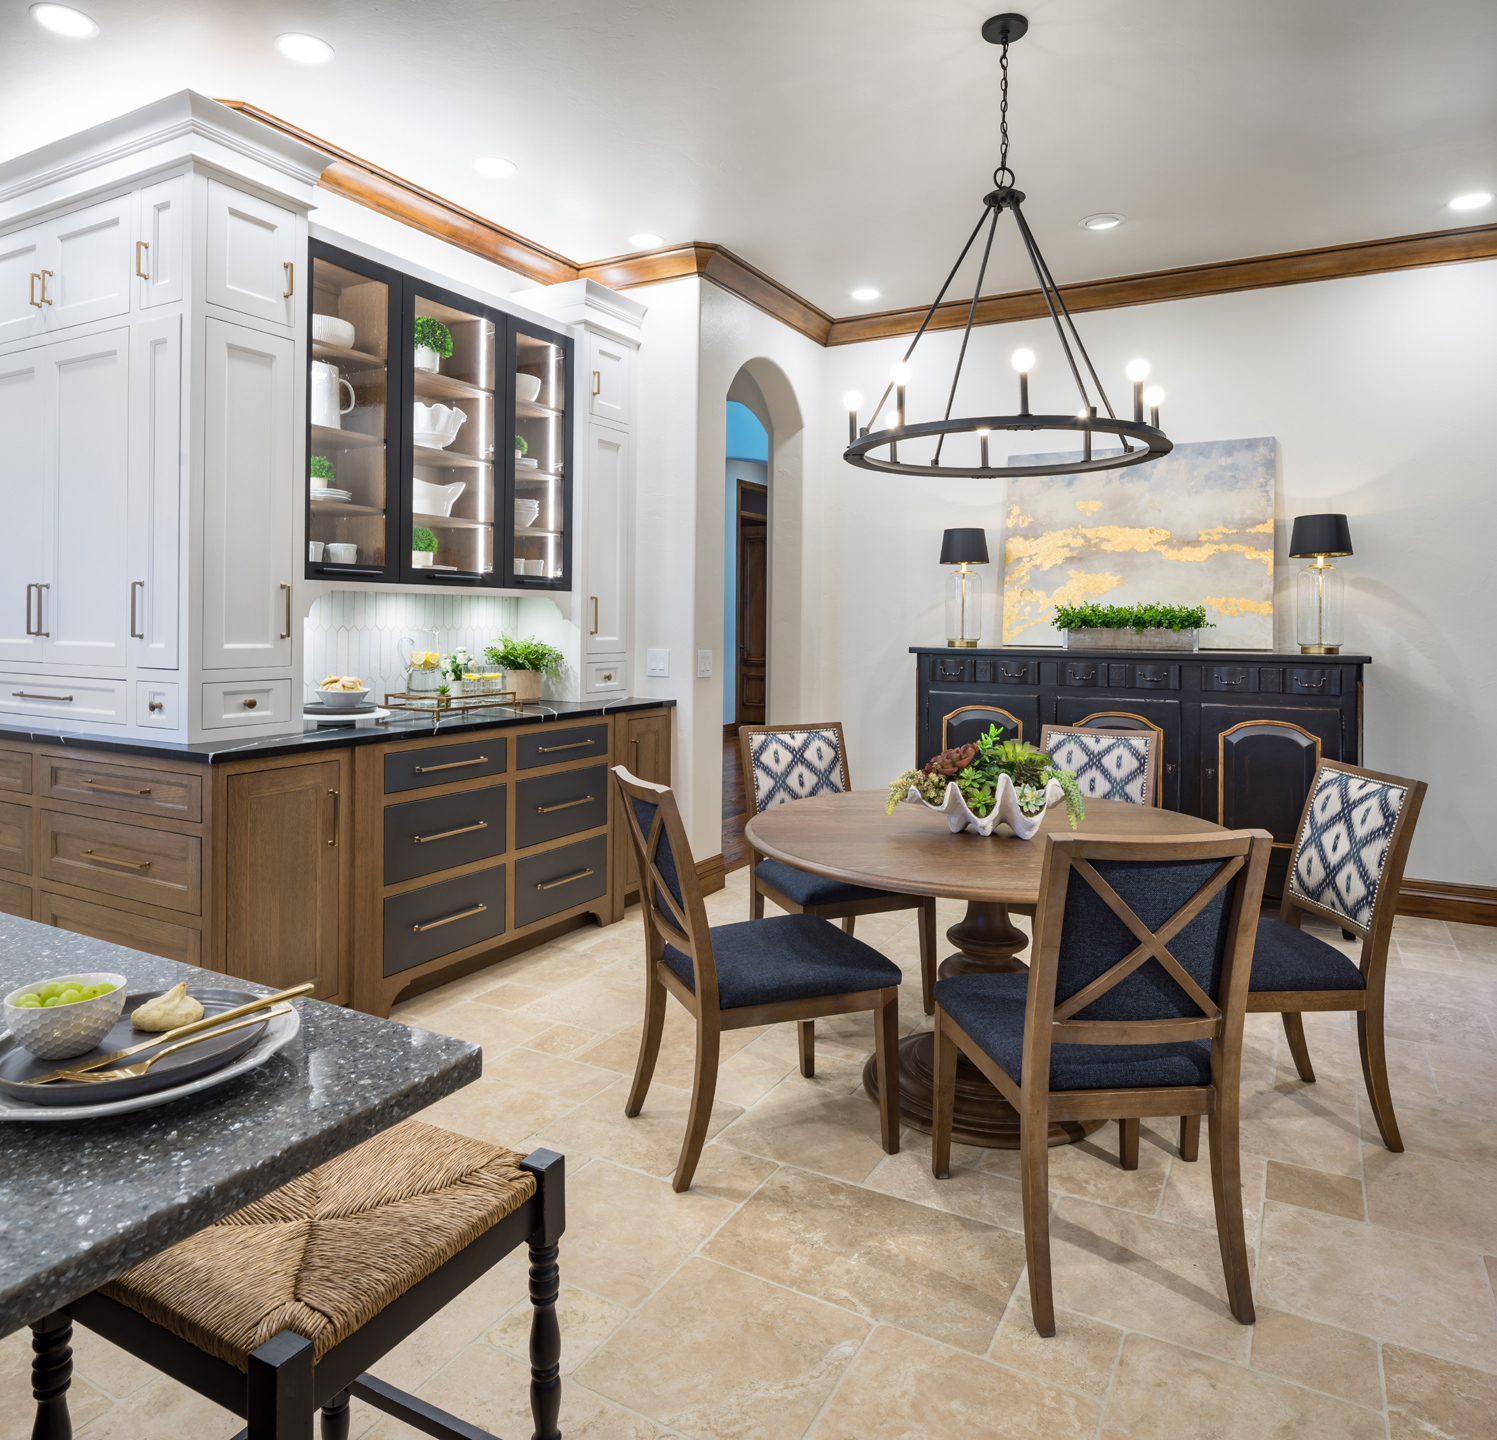 Contemporary Gaillardia Kitchen design with our custom cabinetry in multiple finishes